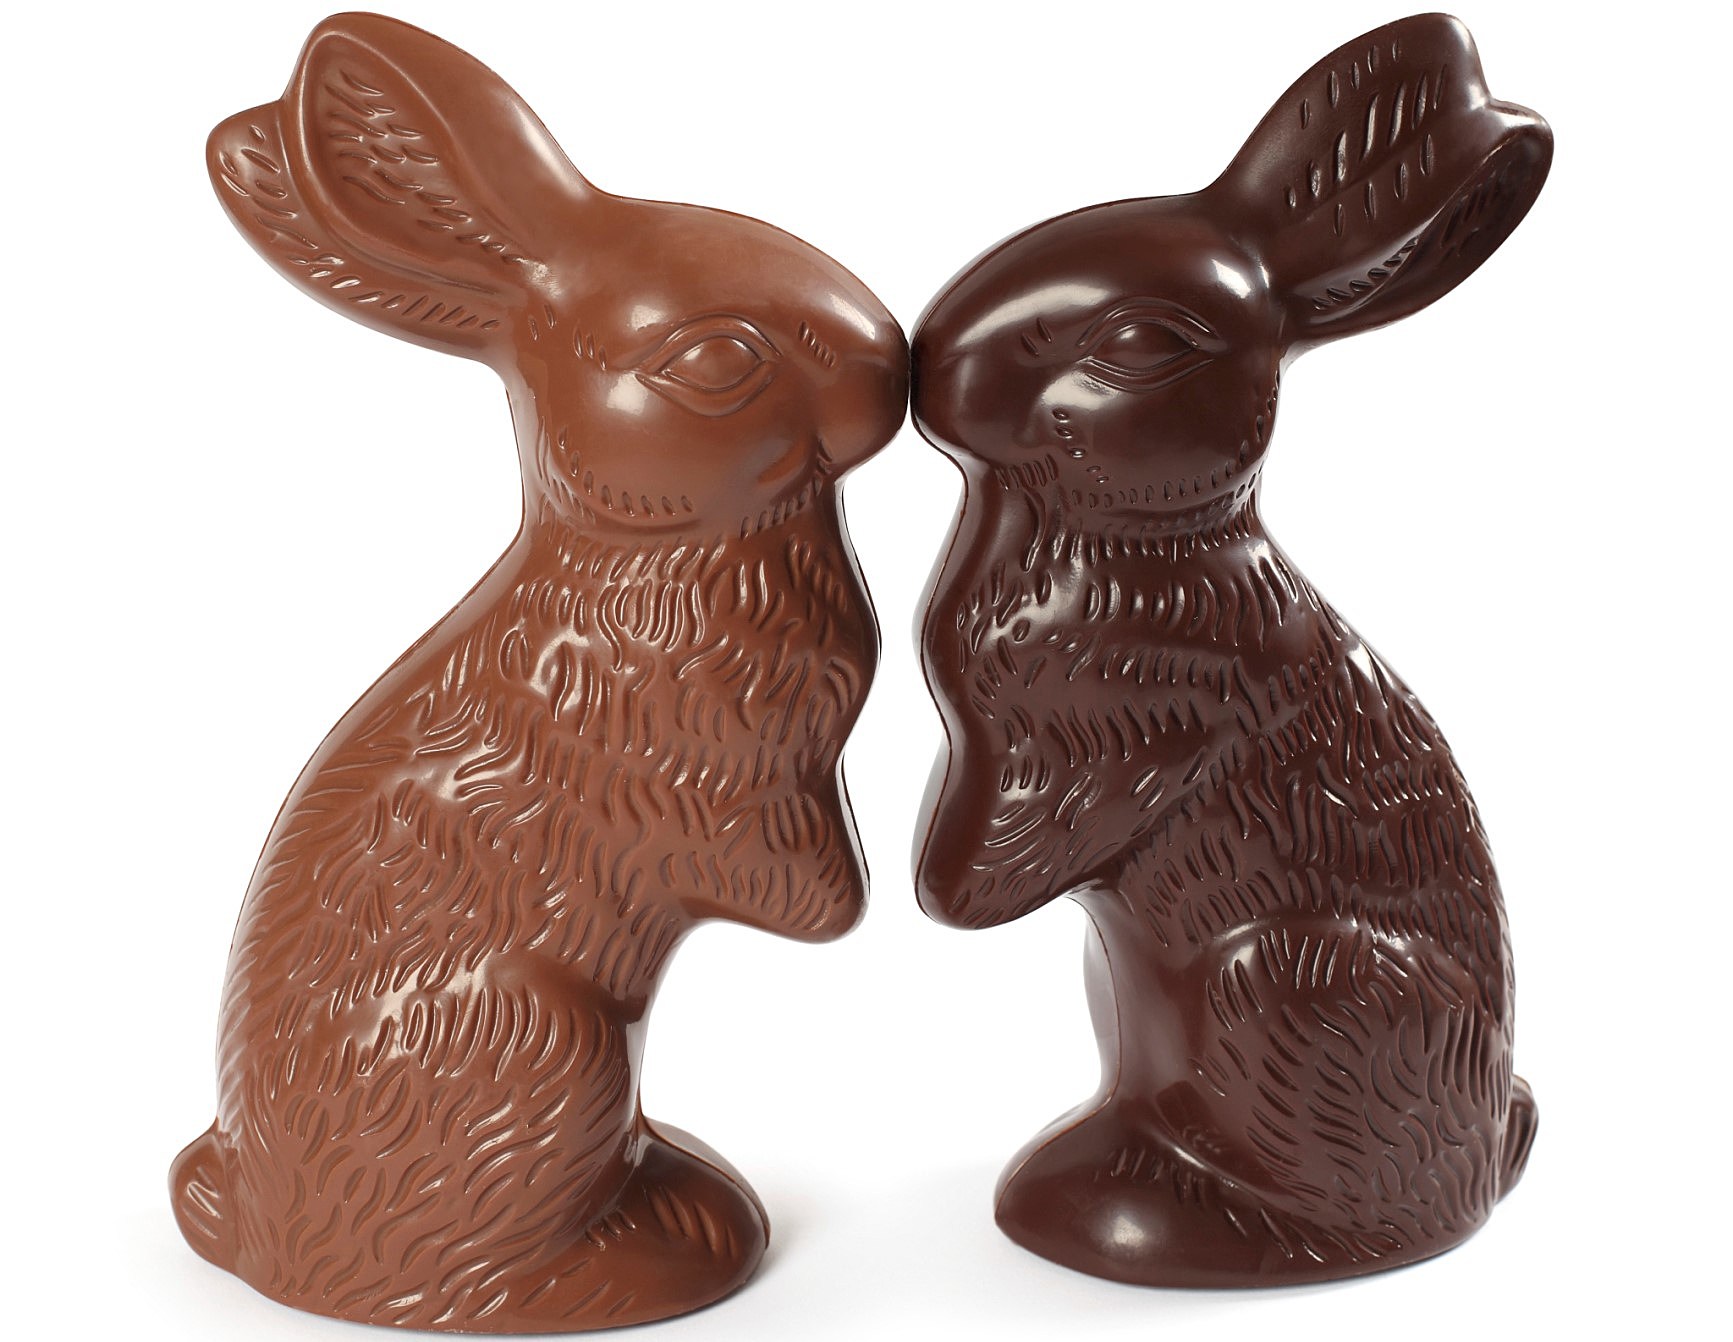 Most People Eat This Part Of A Chocolate Easter Bunny First